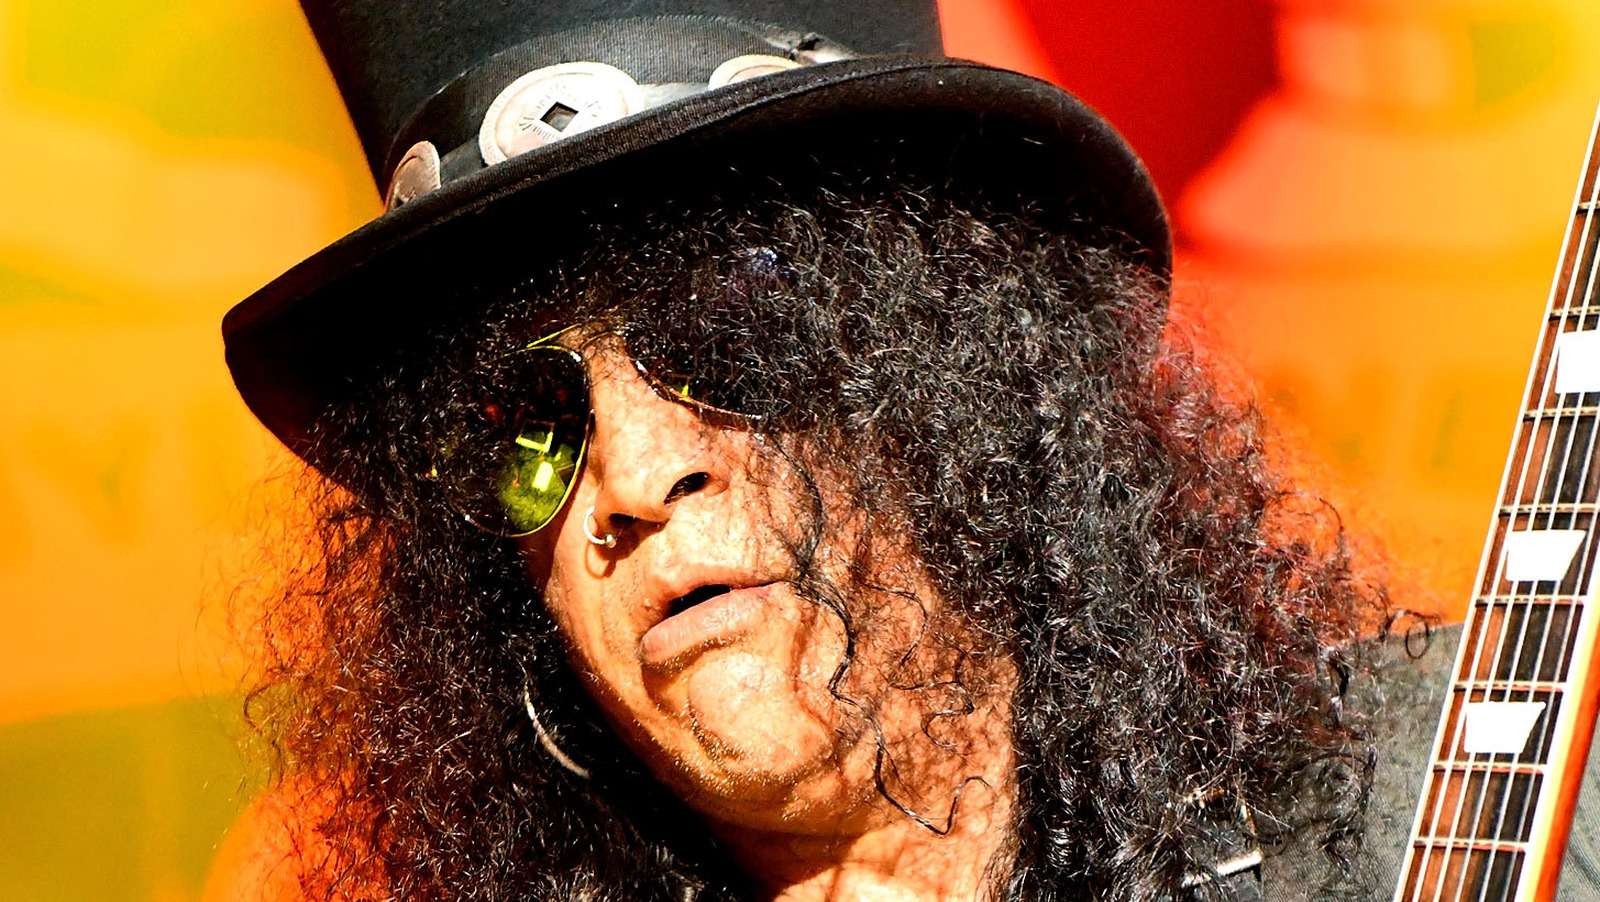 SLASH thinks GUNS N' ROSES would've been canceled today